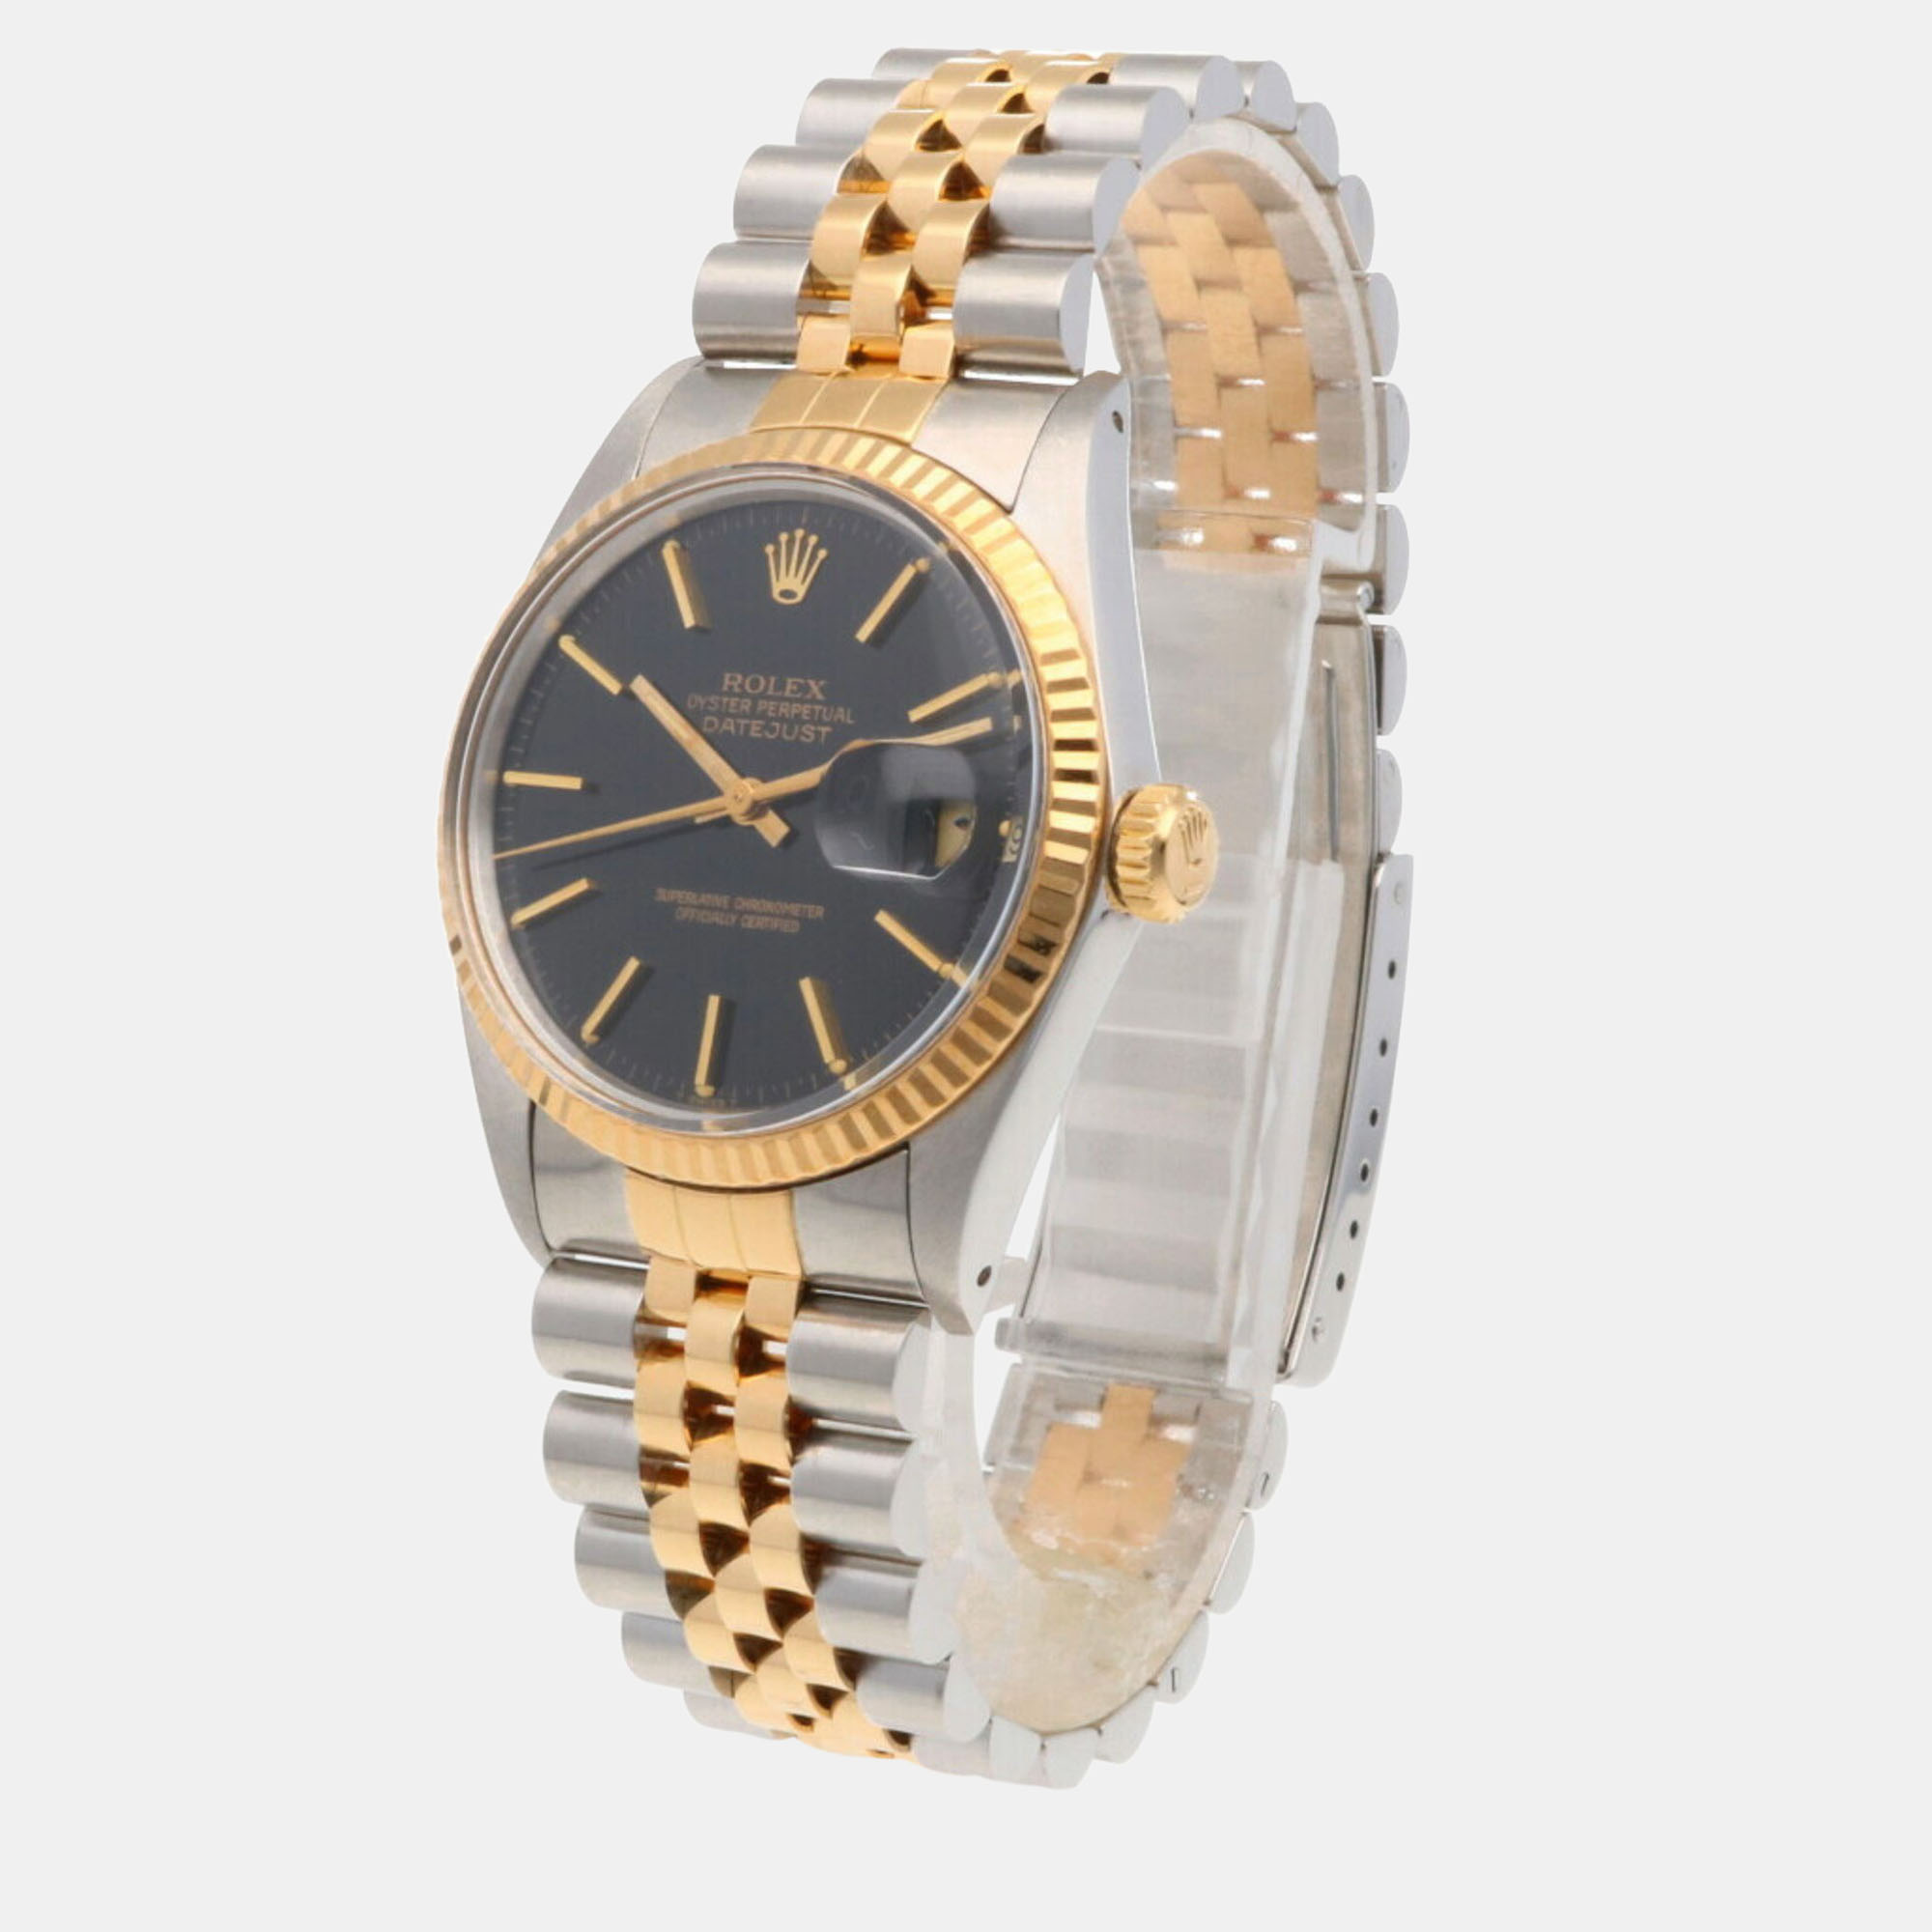 Rolex Black 18k Yellow Gold And Stainless Steel Datejust 16013 Automatic Men's Wristwatch 36 Mm